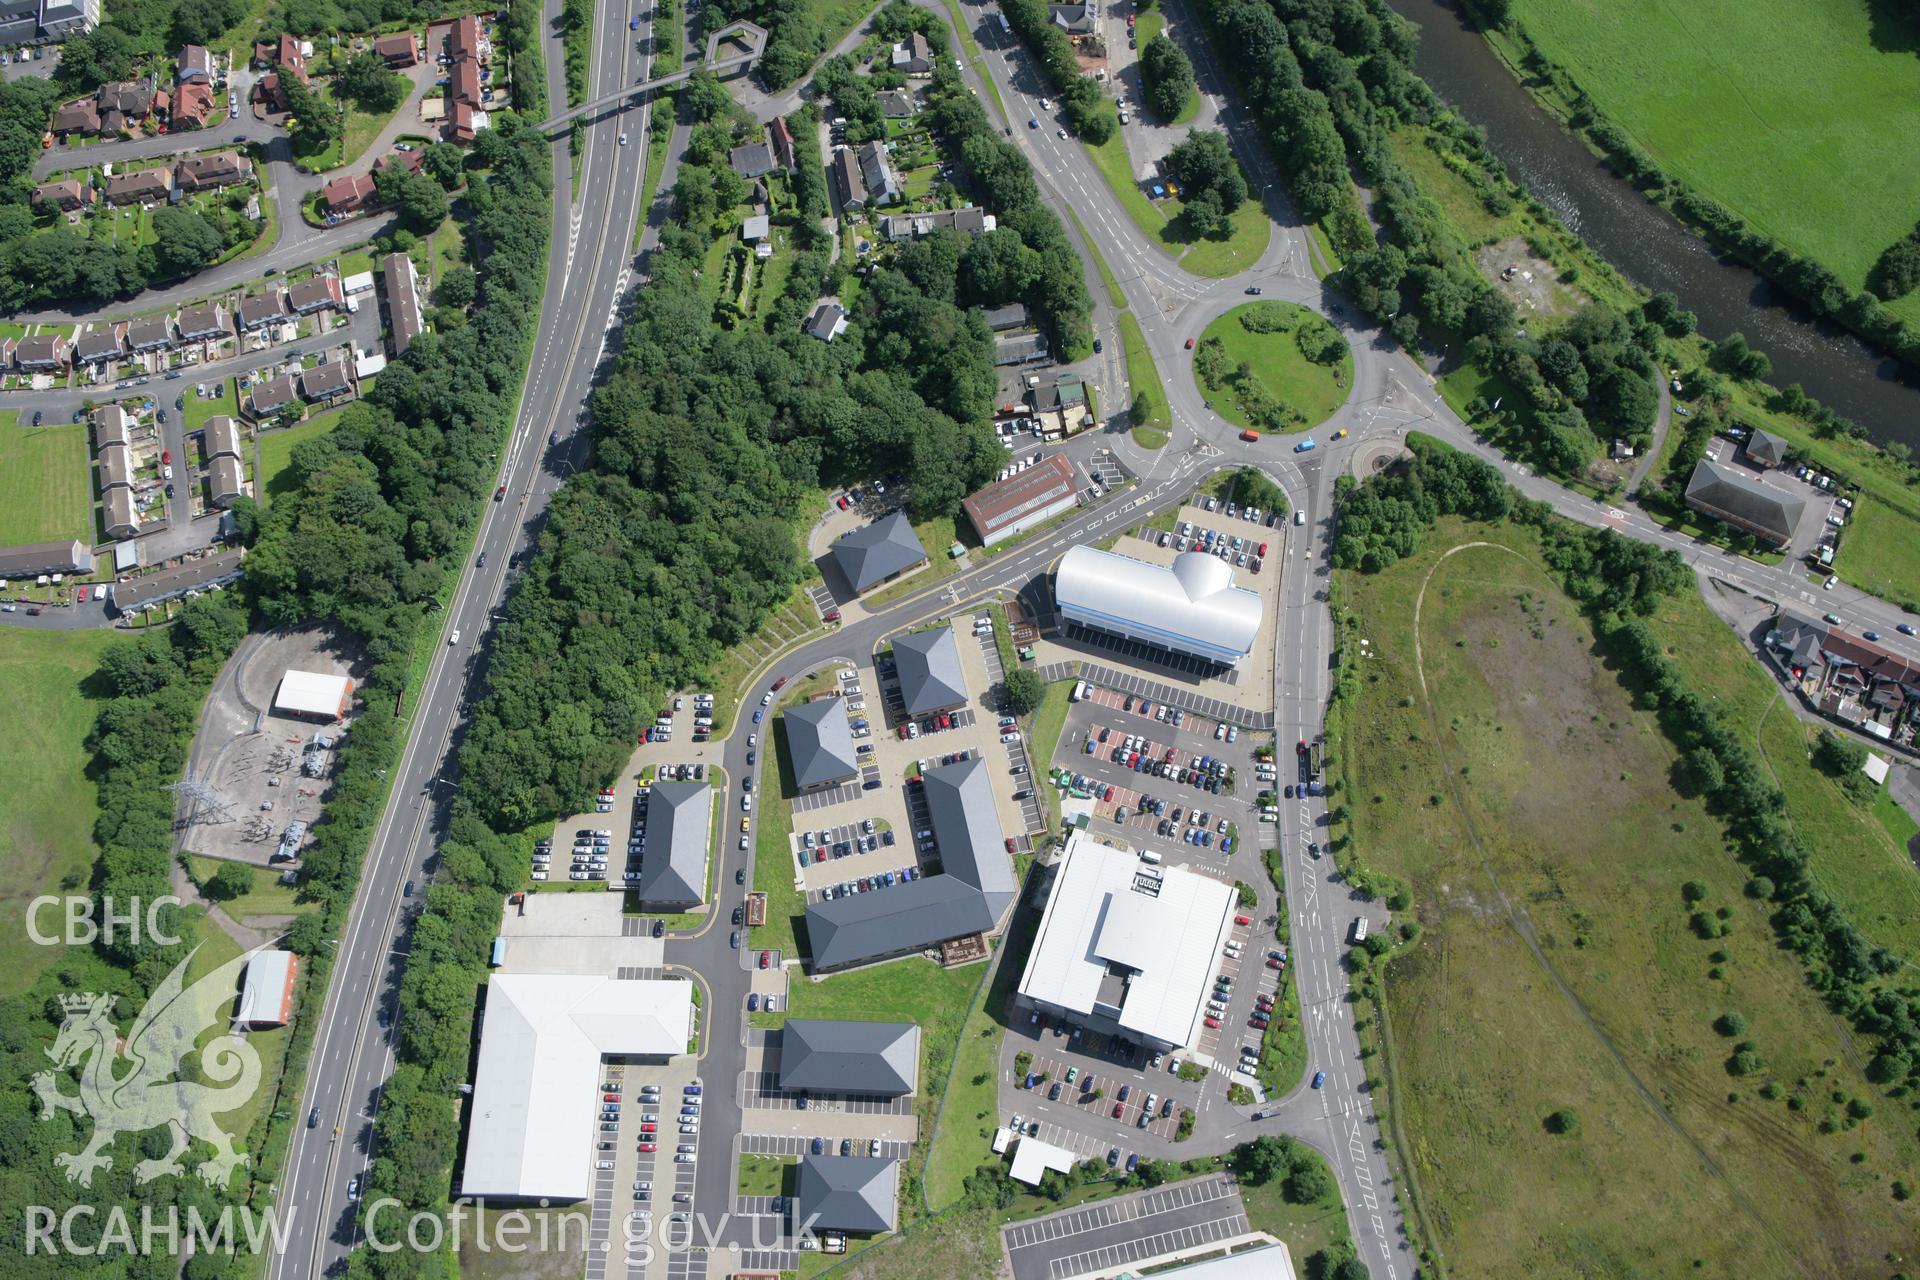 RCAHMW colour oblique aerial photograph of Nantgarw Pottery and industrial estate, Taff's Well. Taken on 30 July 2007 by Toby Driver